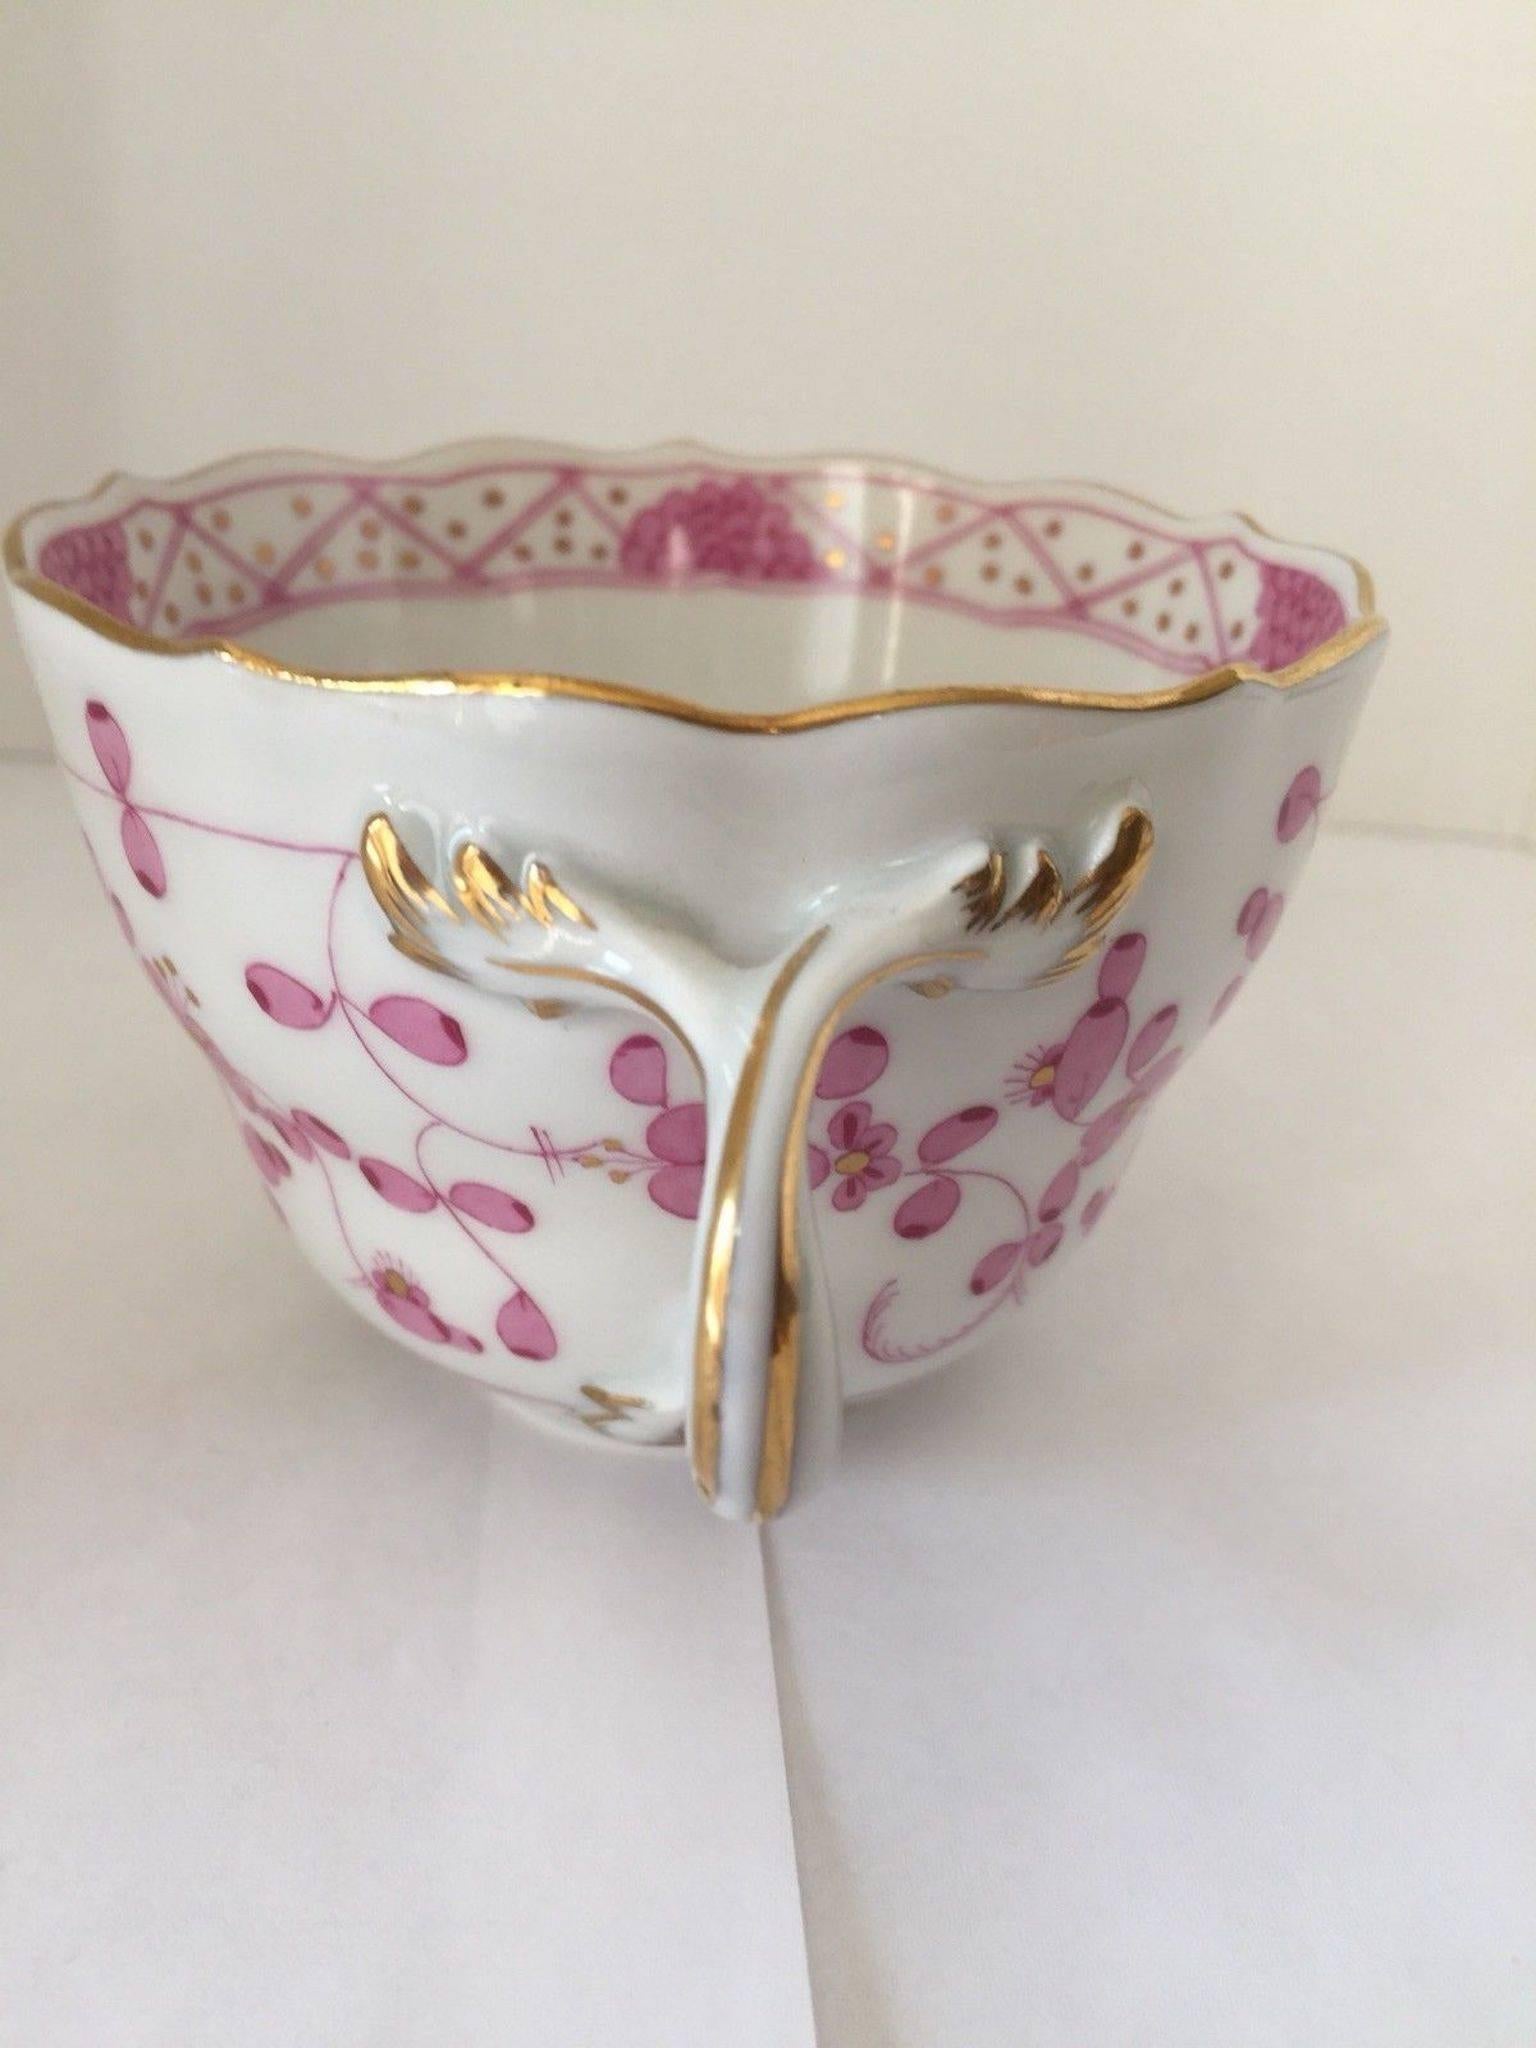 This is a beautiful Meissen scalloped cup and saucer in the purple Indian pattern. The cup has a twisted leaf handle. There is gilt trim on rim of cup and saucer. This dates circa 1850-1900, they are both marked with crossed sword mark on bottom.